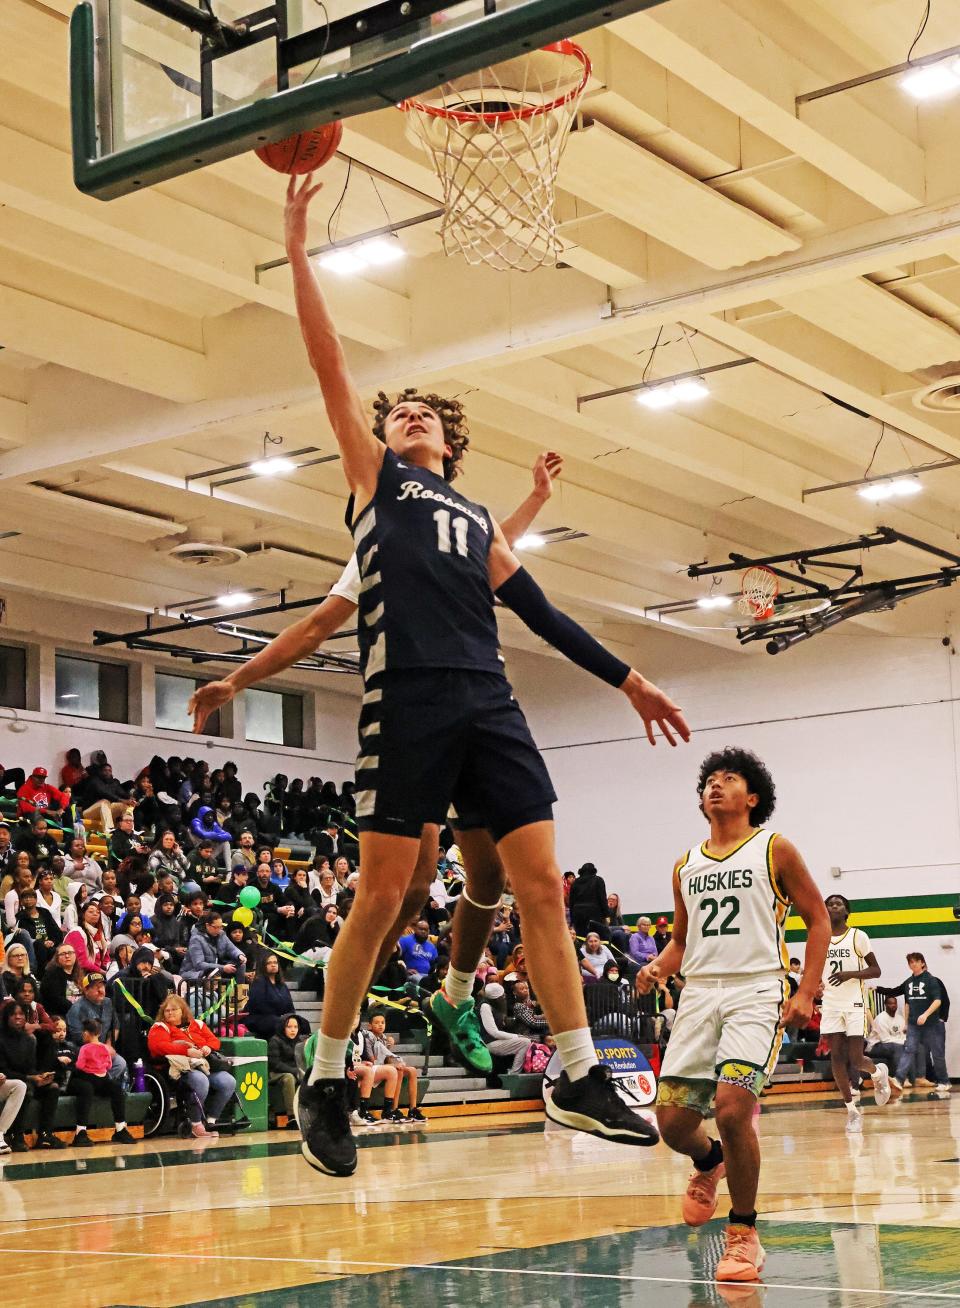 Charlie King (11) drives to the hoop as the Roosevelt Roughriders compete against the Hoover Huskies.